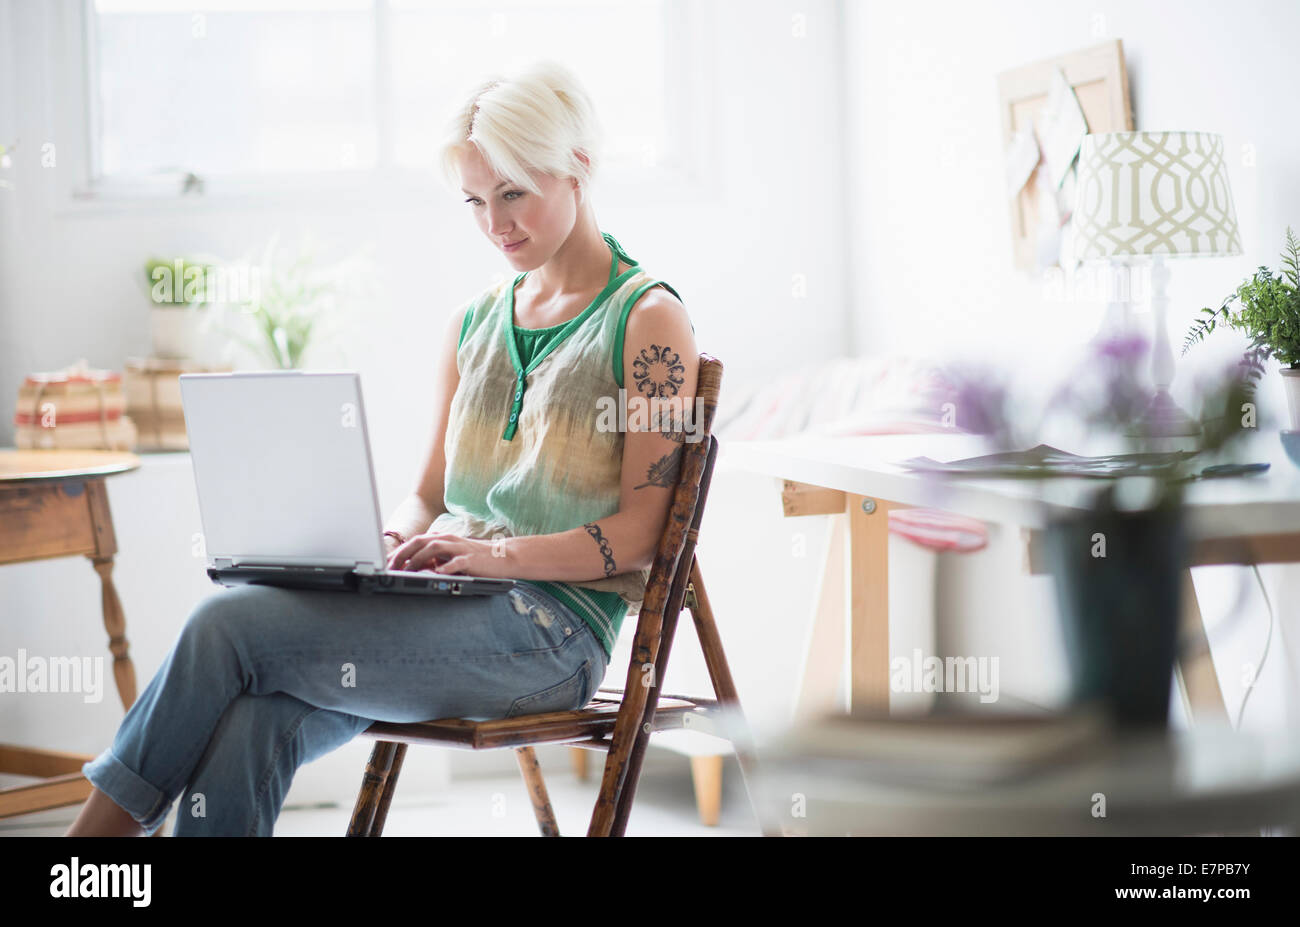 Woman using laptop at home Banque D'Images